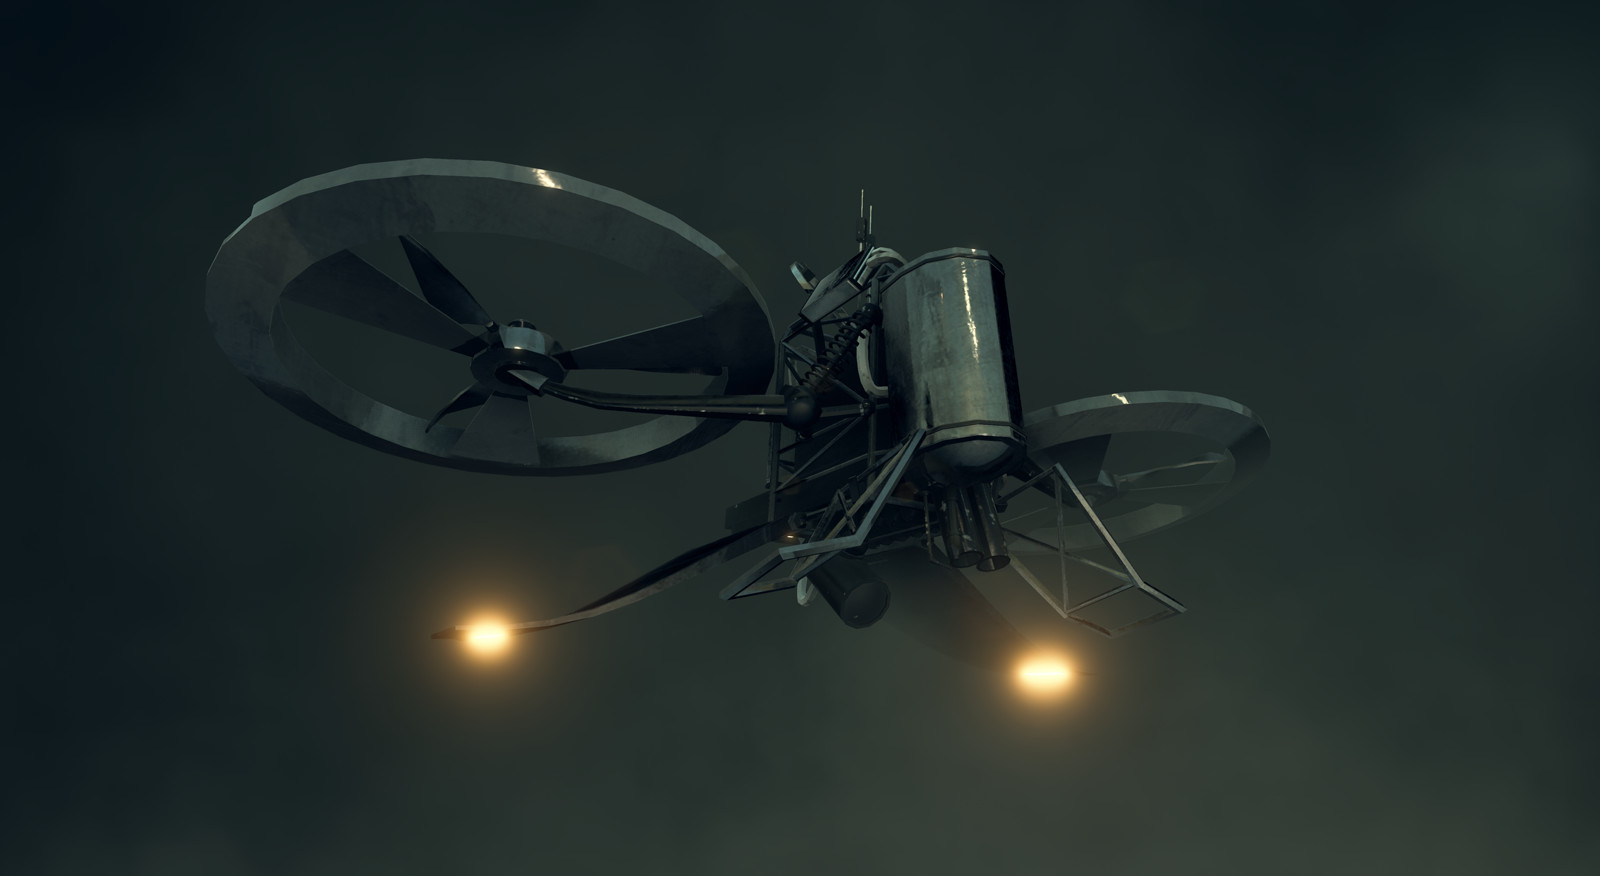 In-engine render of the drone